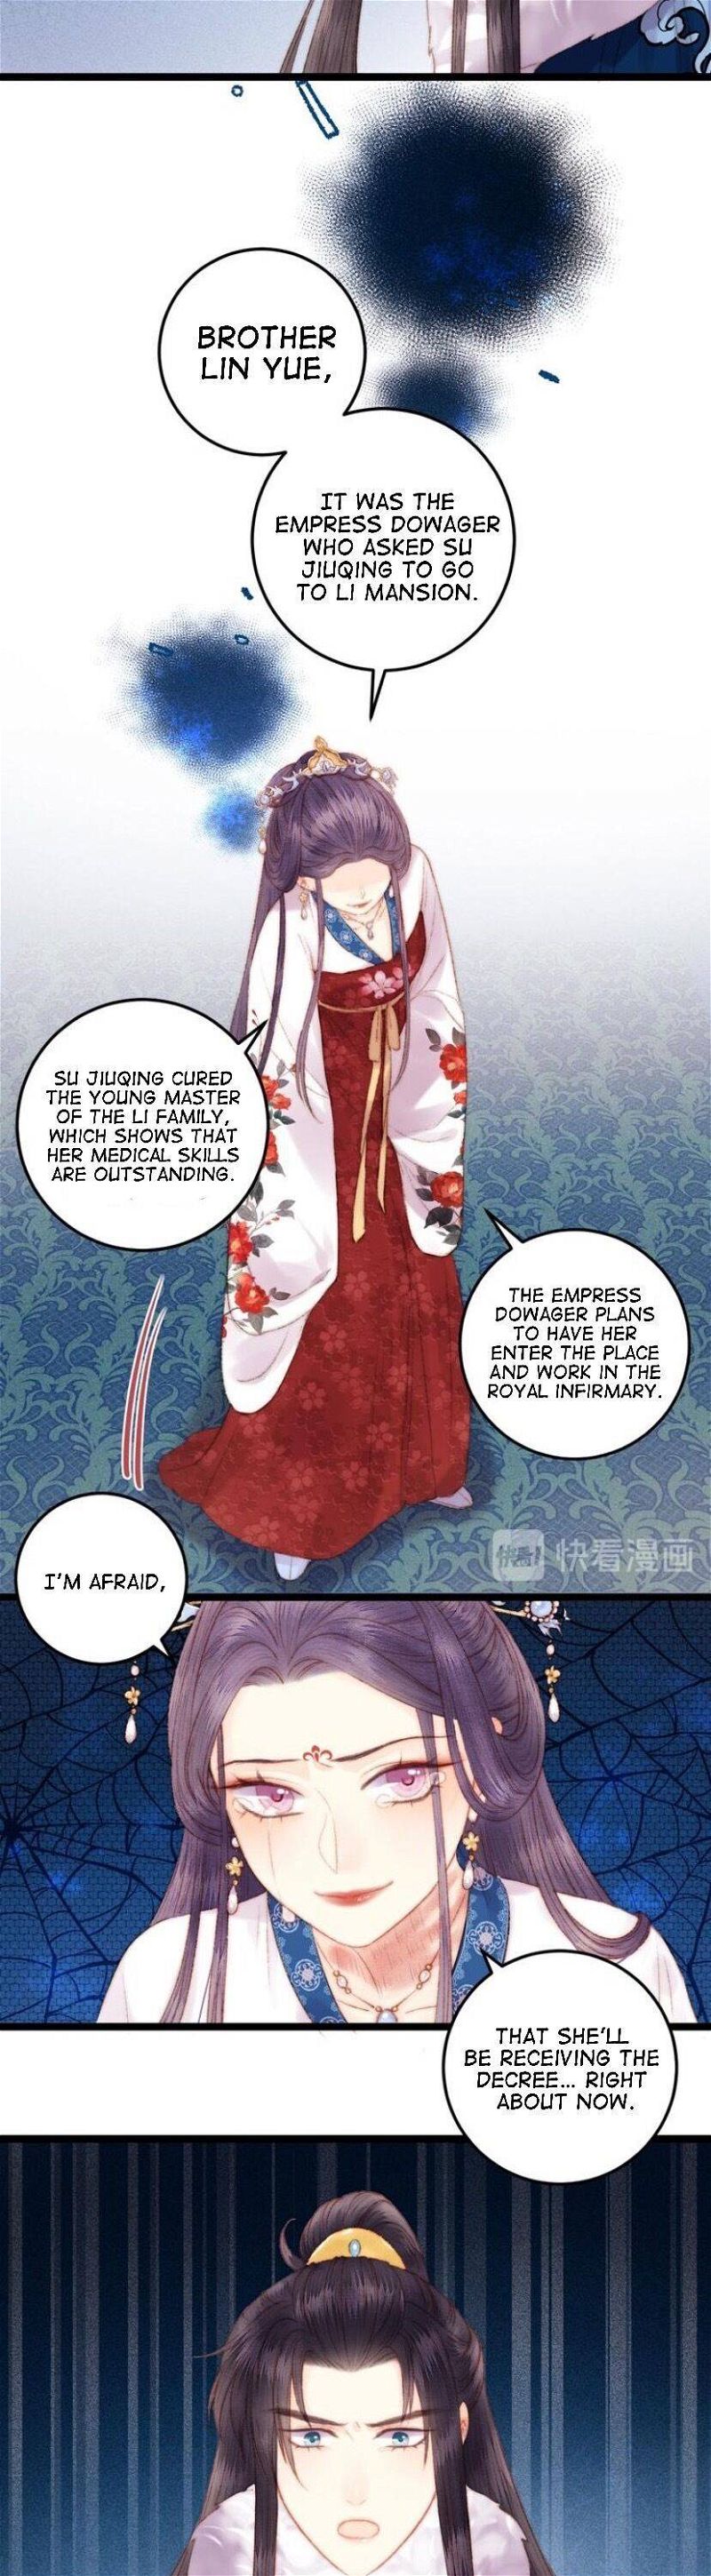 The Goddess of Healing Chapter 93 page 9